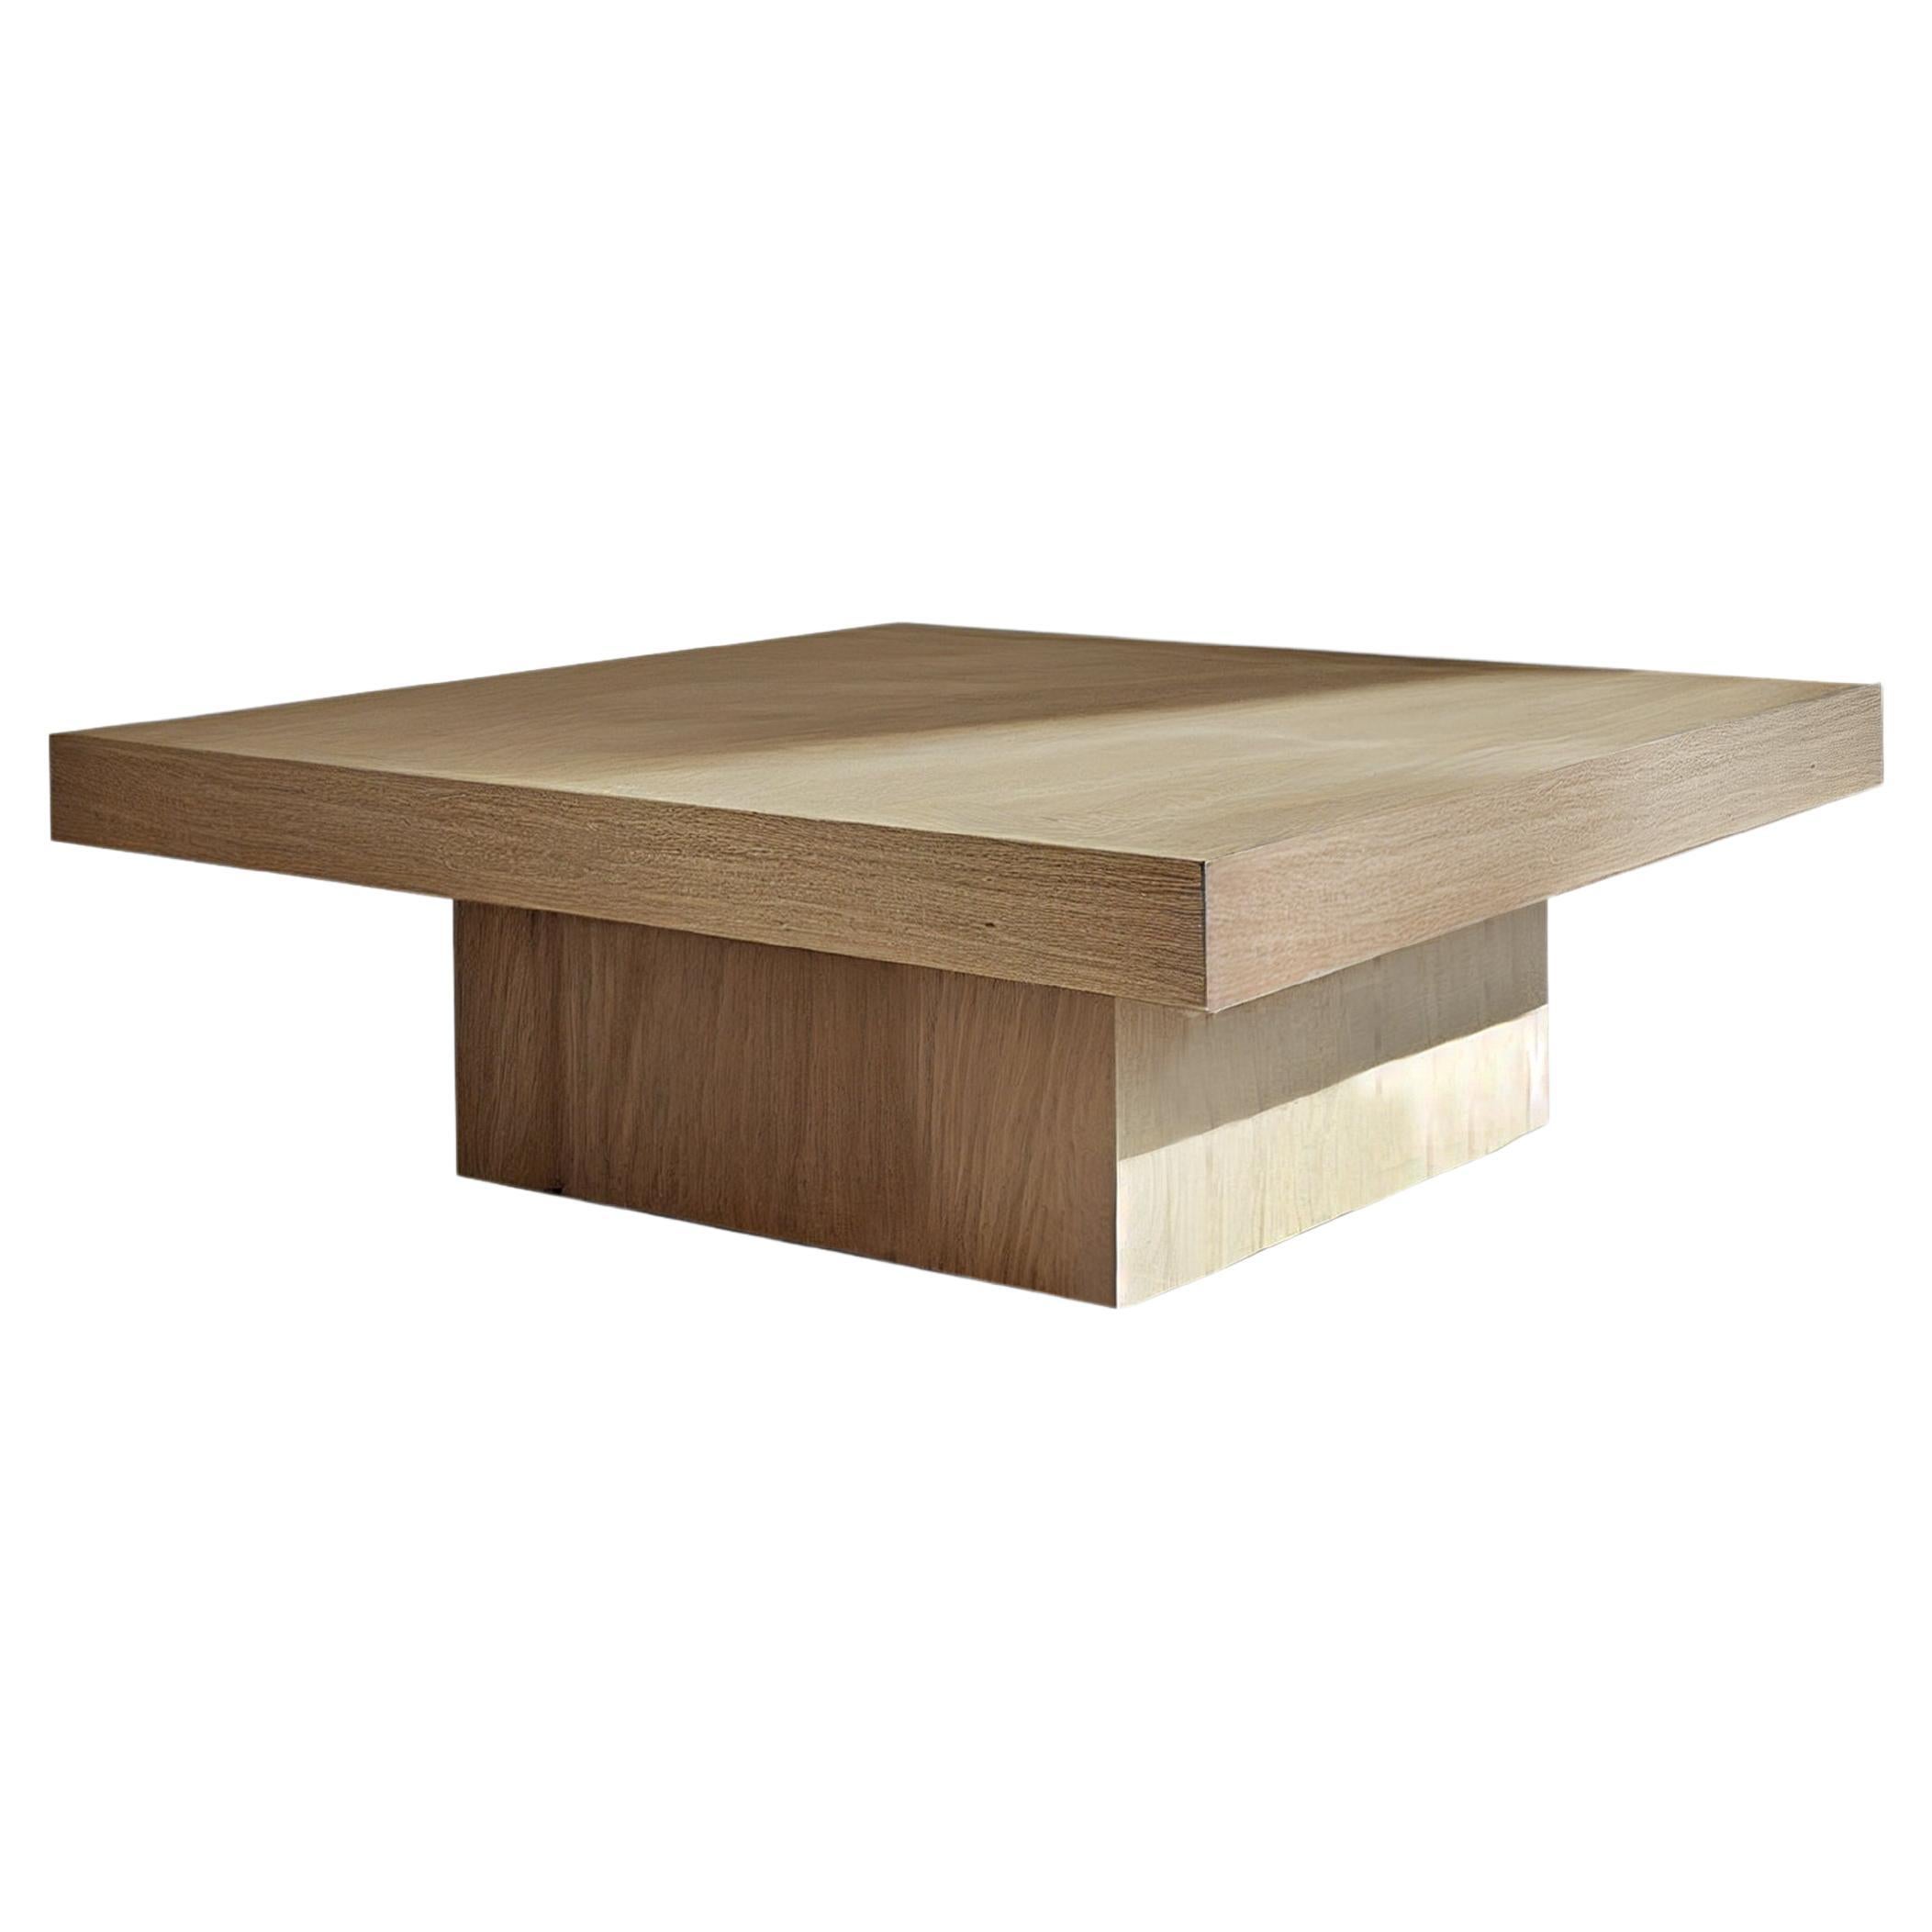 Square Coffee Table Made with Beautiful Walnut Veneer Wood by Nono Furniture